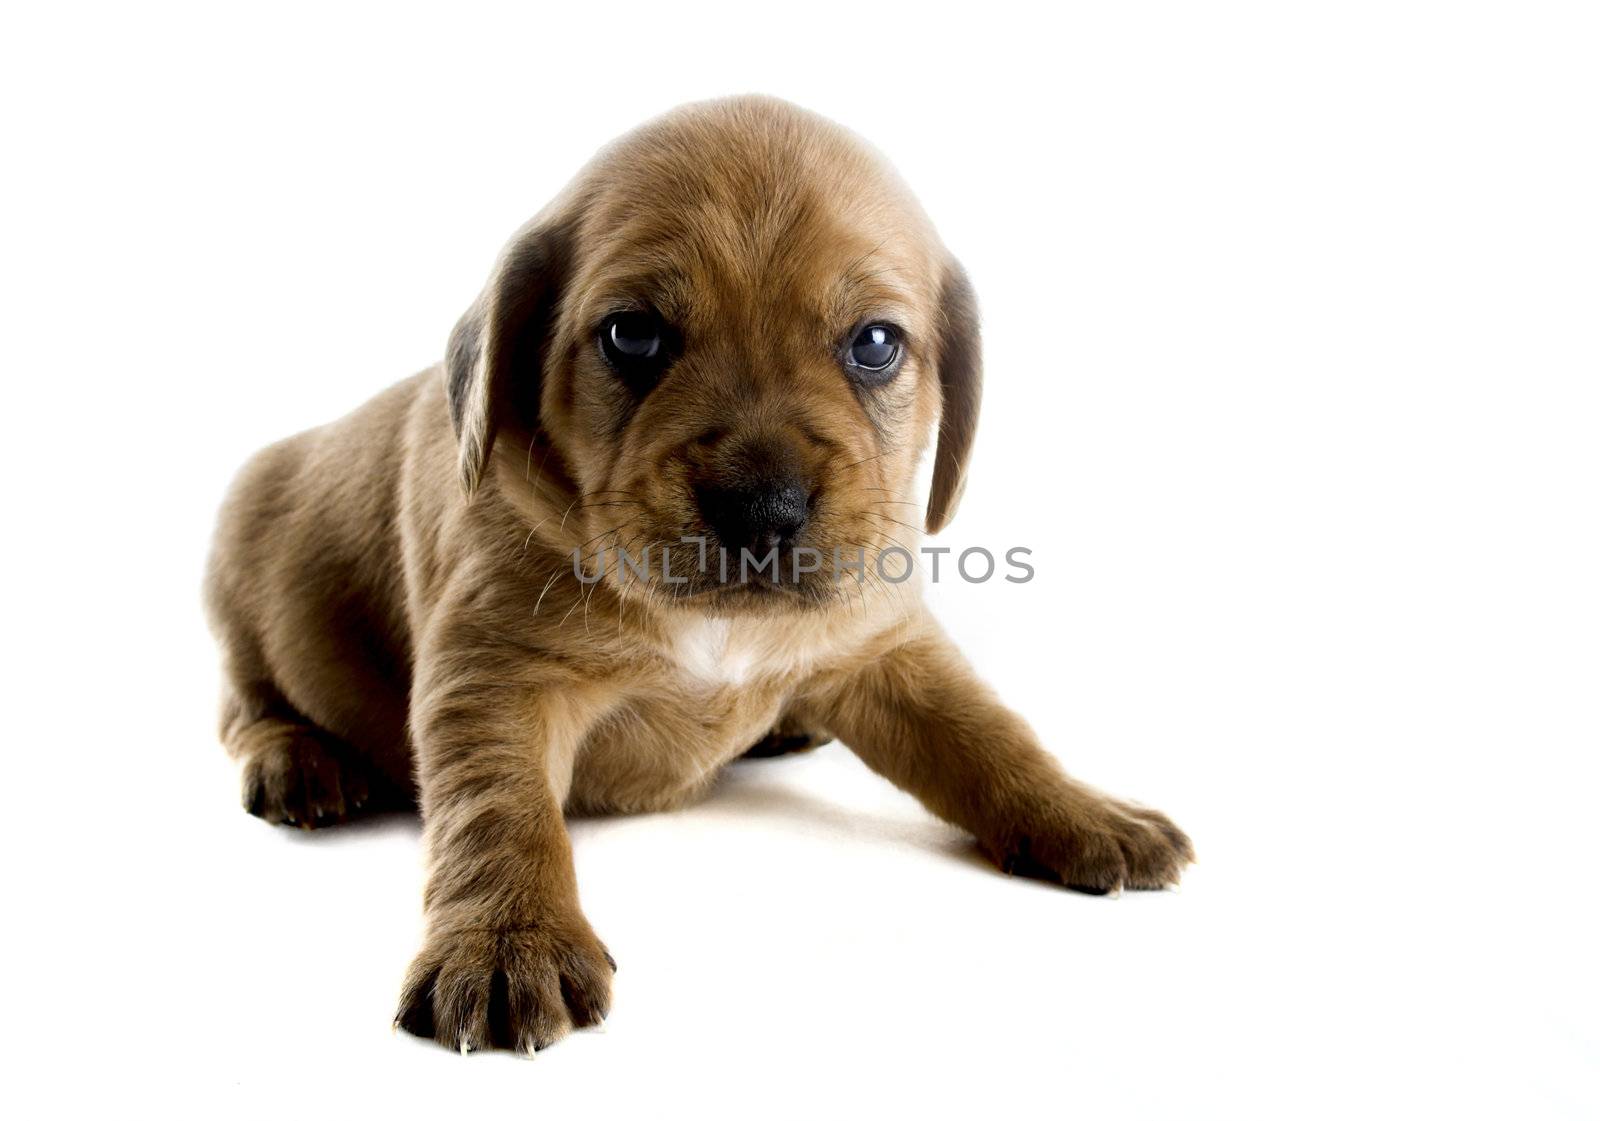 Little cute puppy isolated on white background